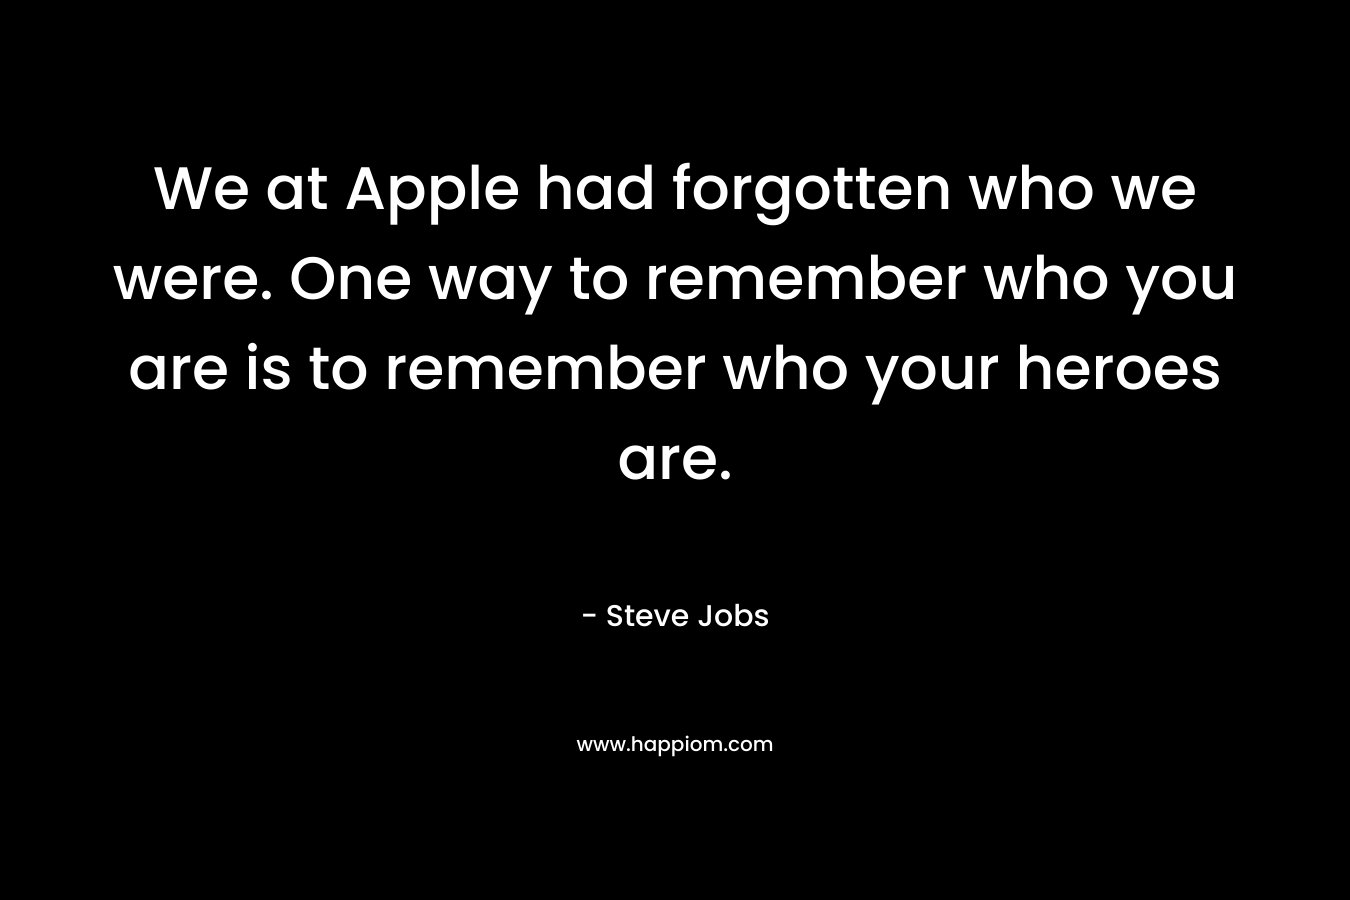 We at Apple had forgotten who we were. One way to remember who you are is to remember who your heroes are. – Steve Jobs